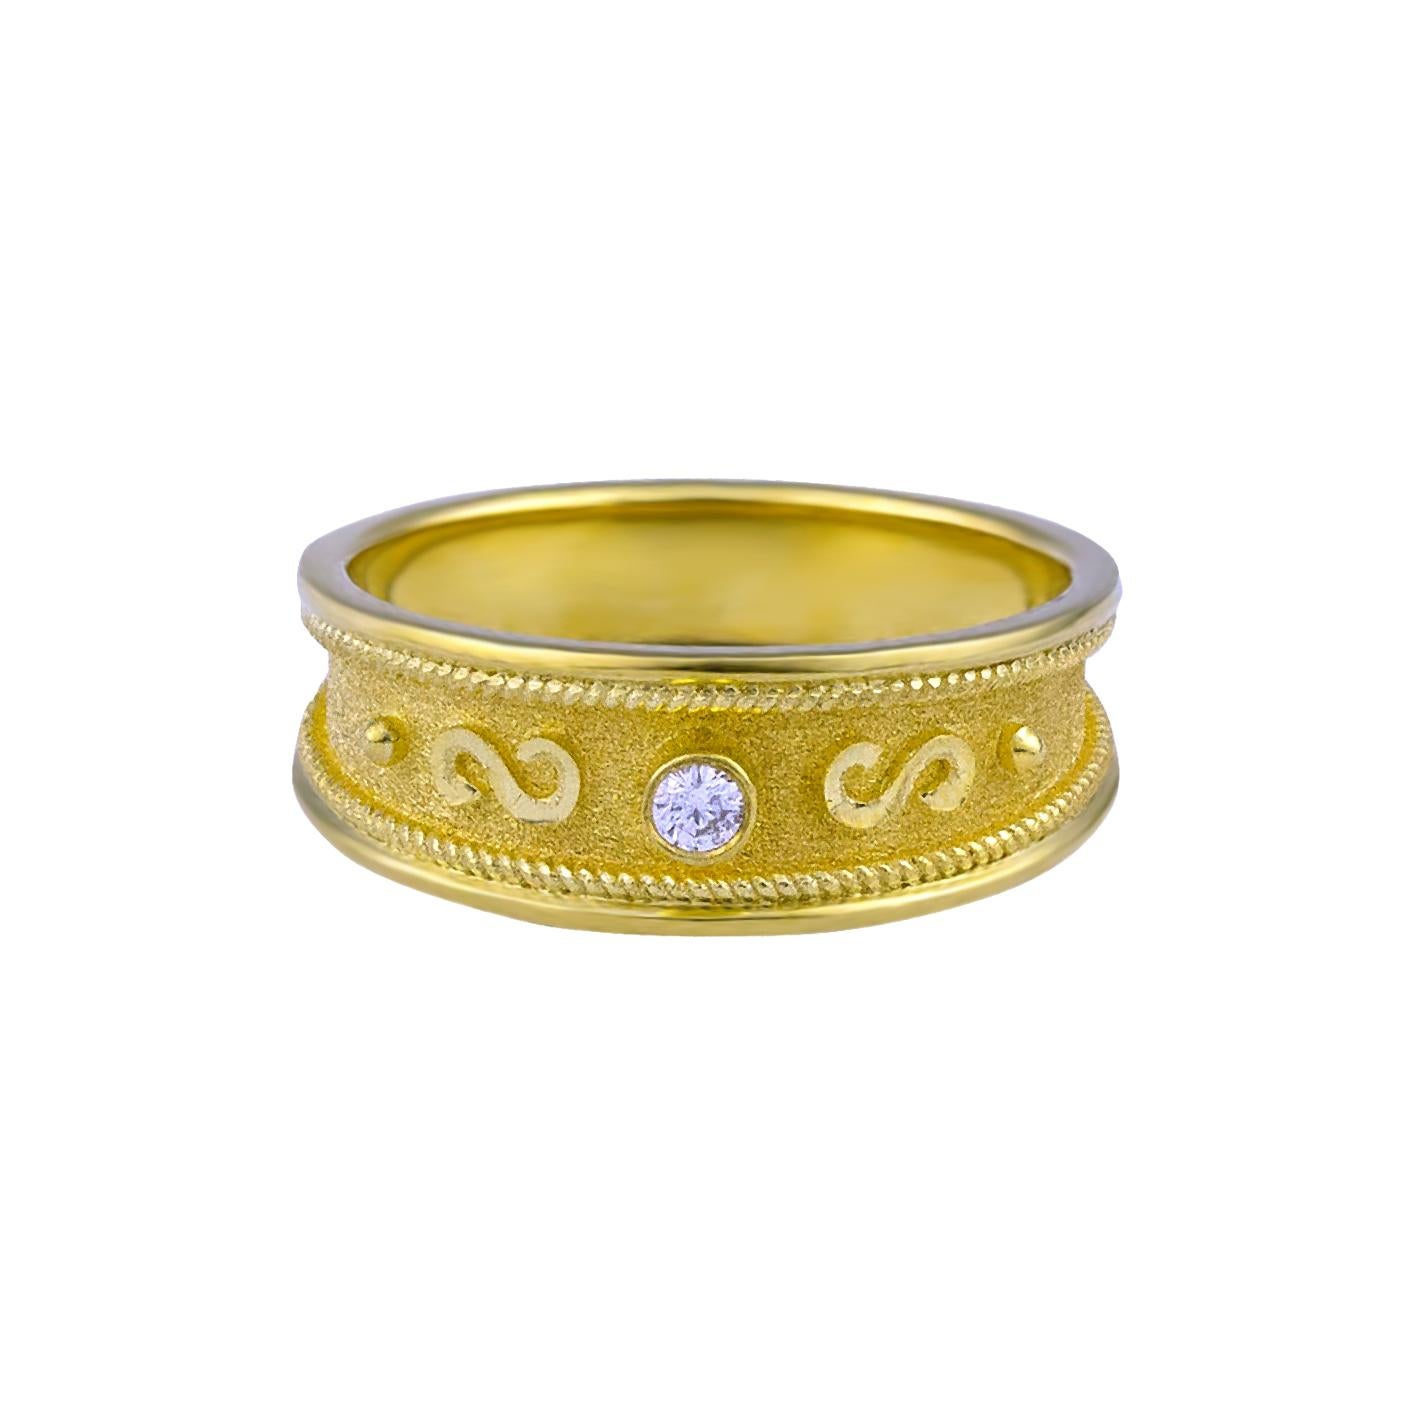 S.Georgios designer Band Ring is handmade from solid 18 Karat Yellow Gold all custom-made. This stunning ring is microscopically decorated with gold wires -granulated details contrast with Byzantine velvet finish on the background. The ring features